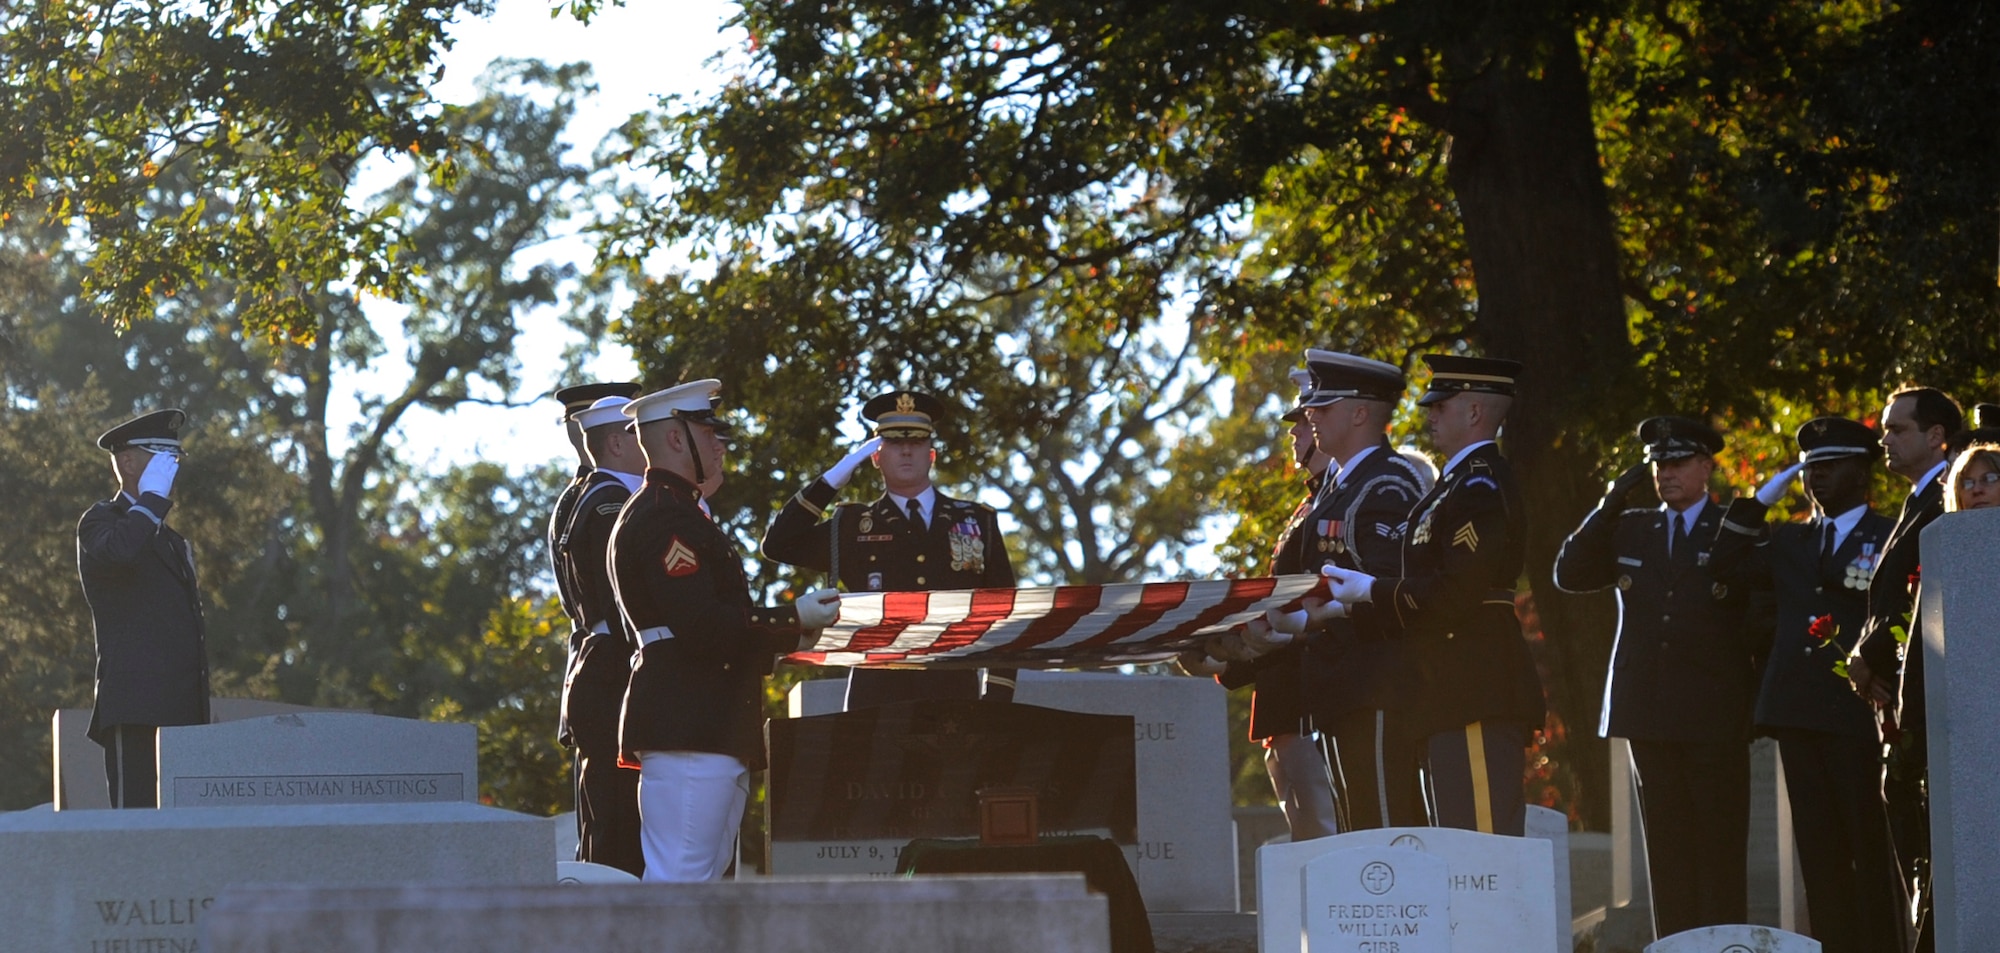 A joint service color guard folds the flag over retired Gen. David C. Jones’ casket during his funeral Oct. 25, 2013, at Arlington National Cemetery, Va. Jones served four years as Air Force chief of staff from 1974 to 1978 until he was appointed chairman of the Joint Chiefs of Staff June 21, 1978. As chairman he served as the senior military adviser to the president, the National Security Council and the secretary of Defense. He entered the Army Air Corps and began aviation cadet training in April 1942. He received his commission and pilot wings in February 1943. The Army, Marine Corp and Coast Guard were also in attendance conducting military honors.